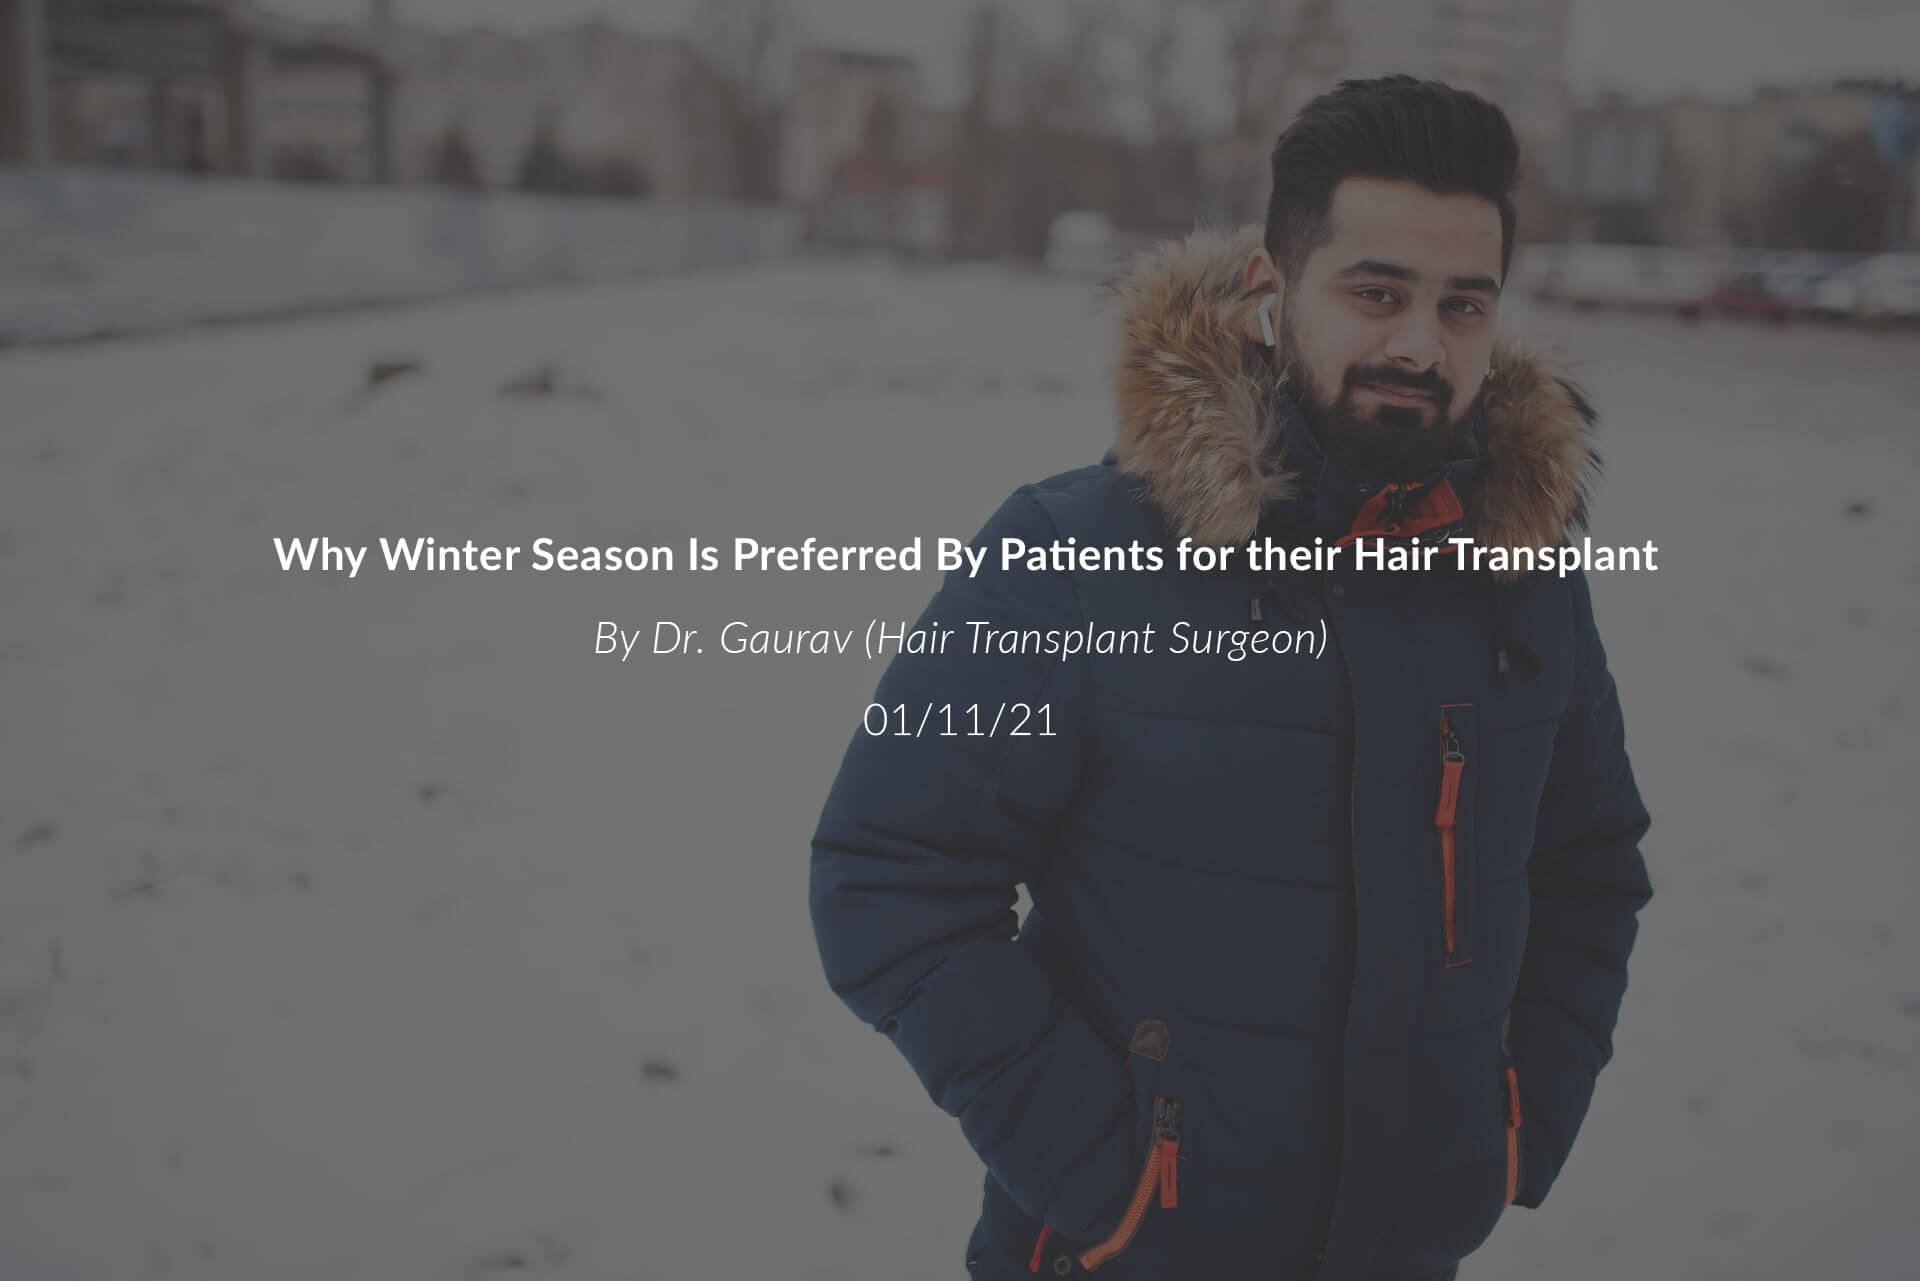 Why Winter Season Is Preferred By Patients for their Hair Transplant